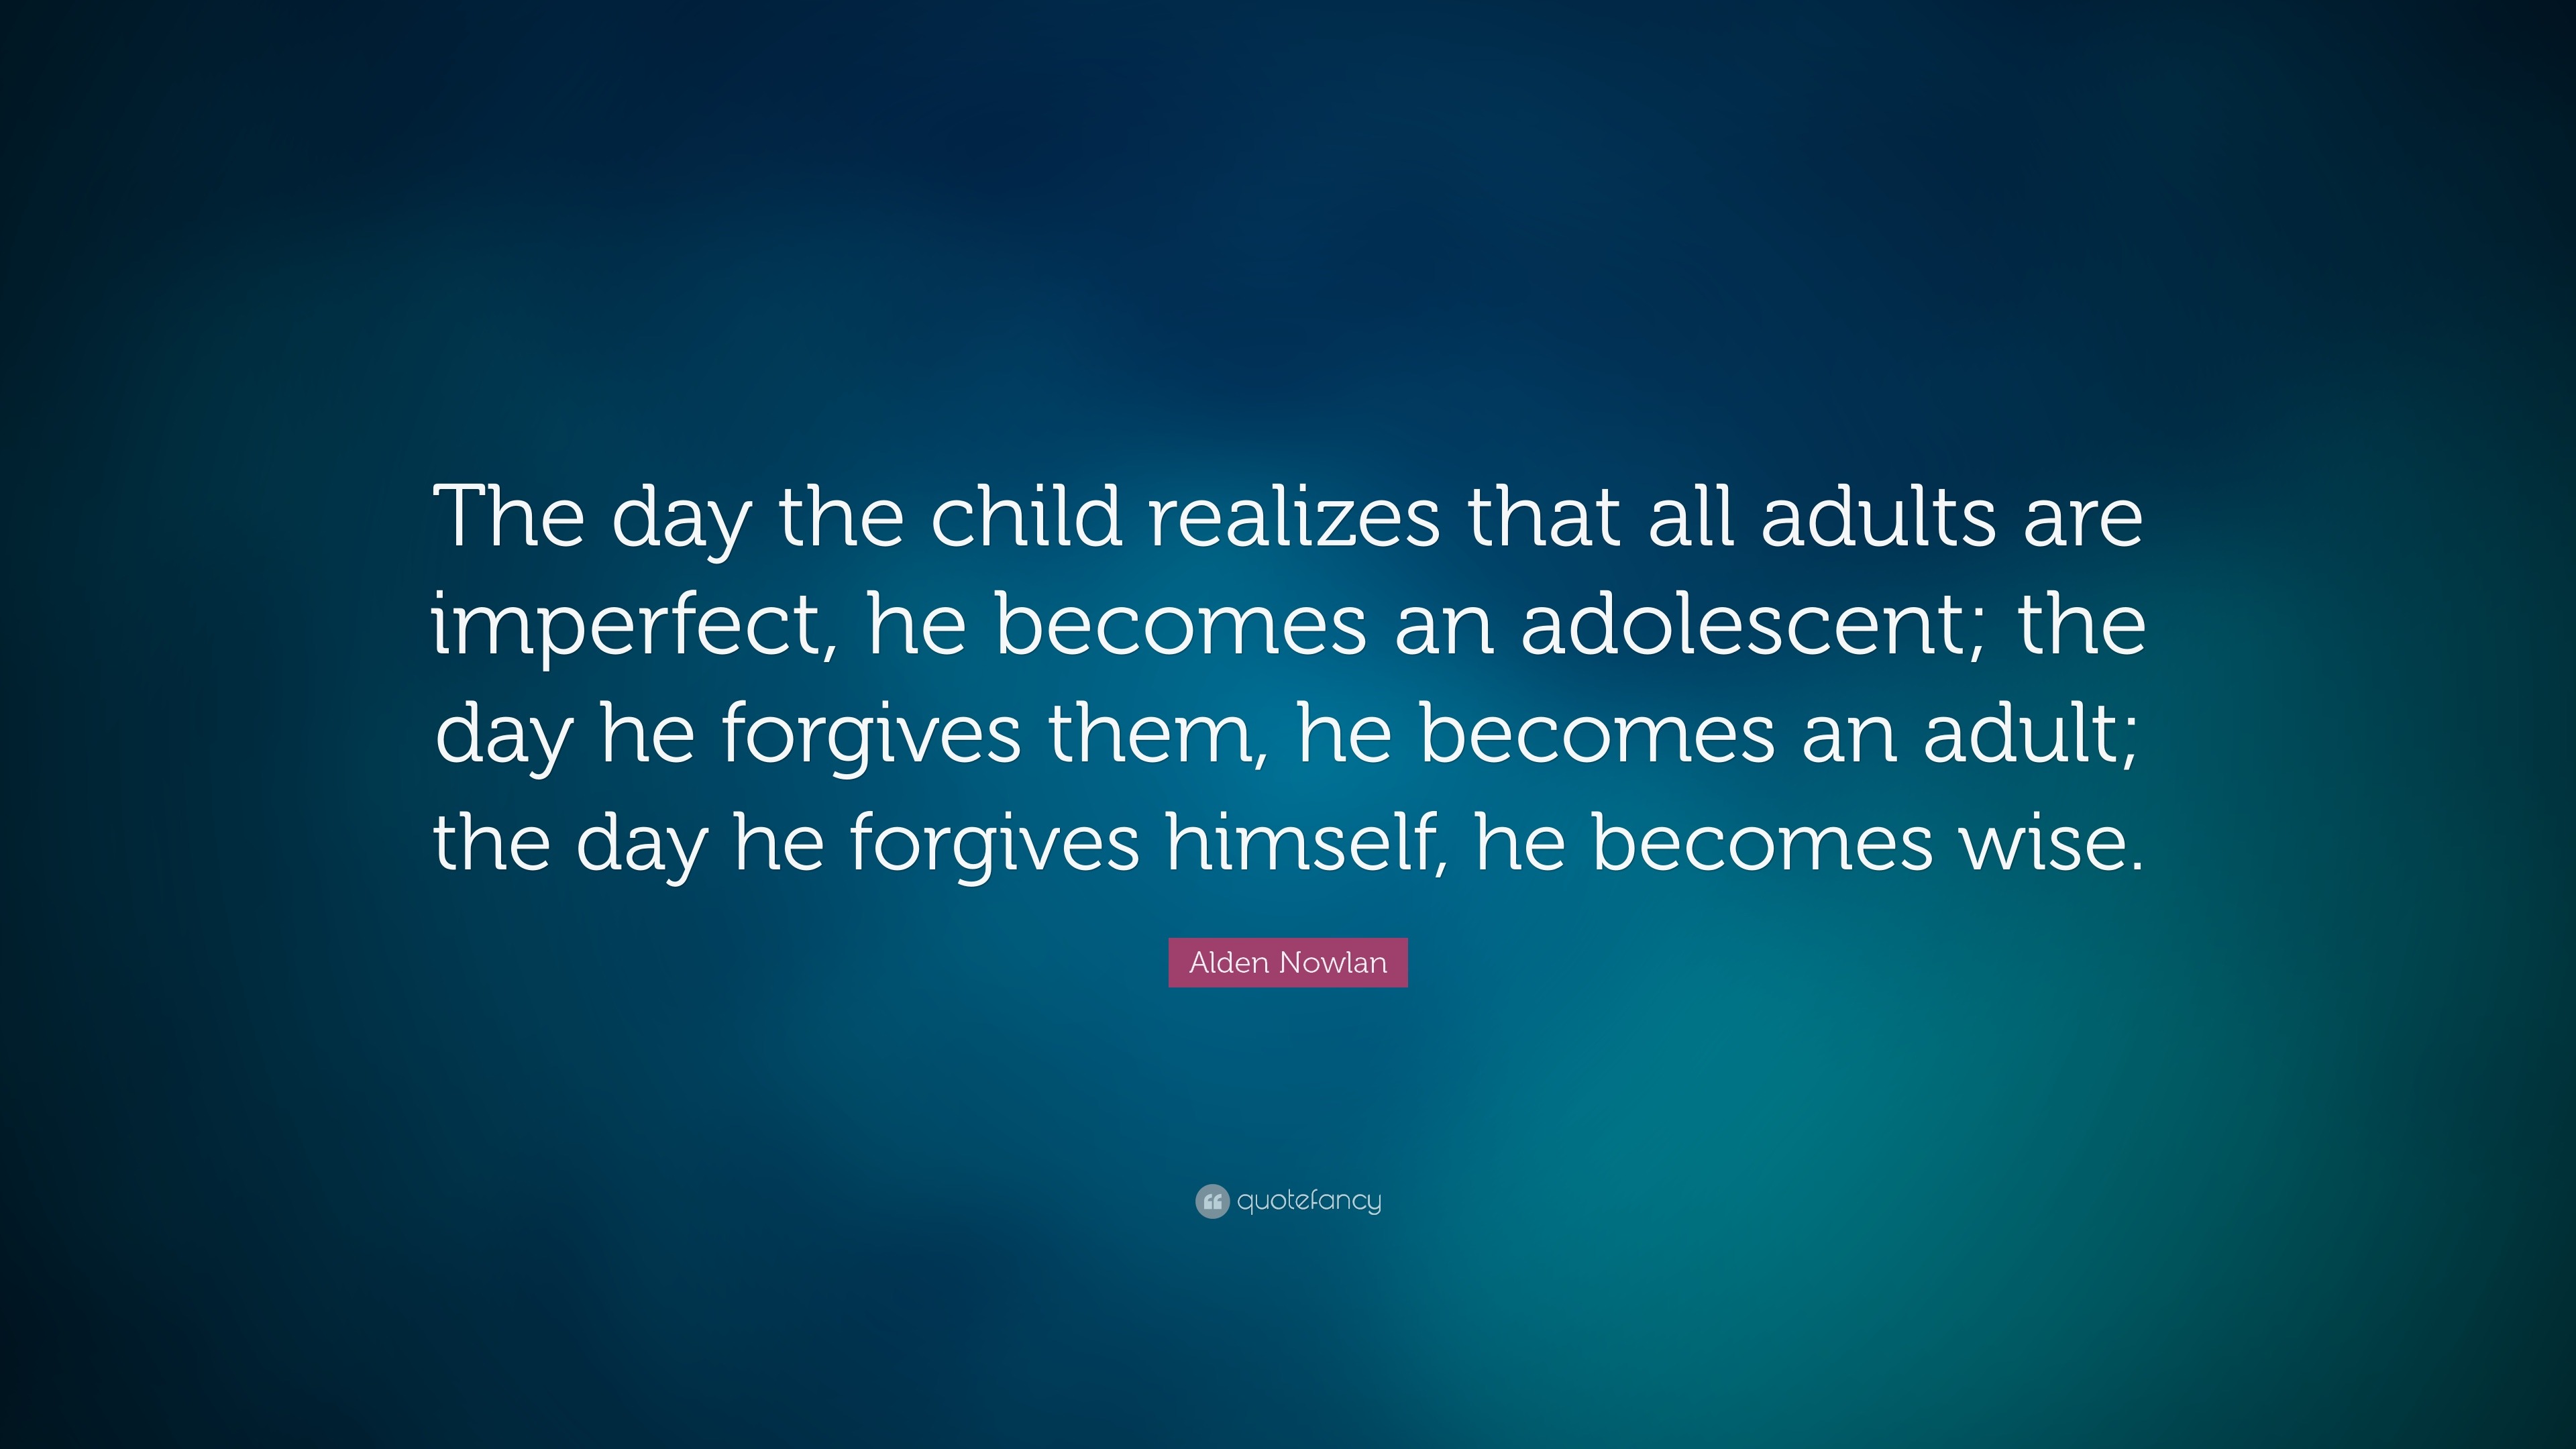 Alden Nowlan Quote: “The day the child realizes that all adults